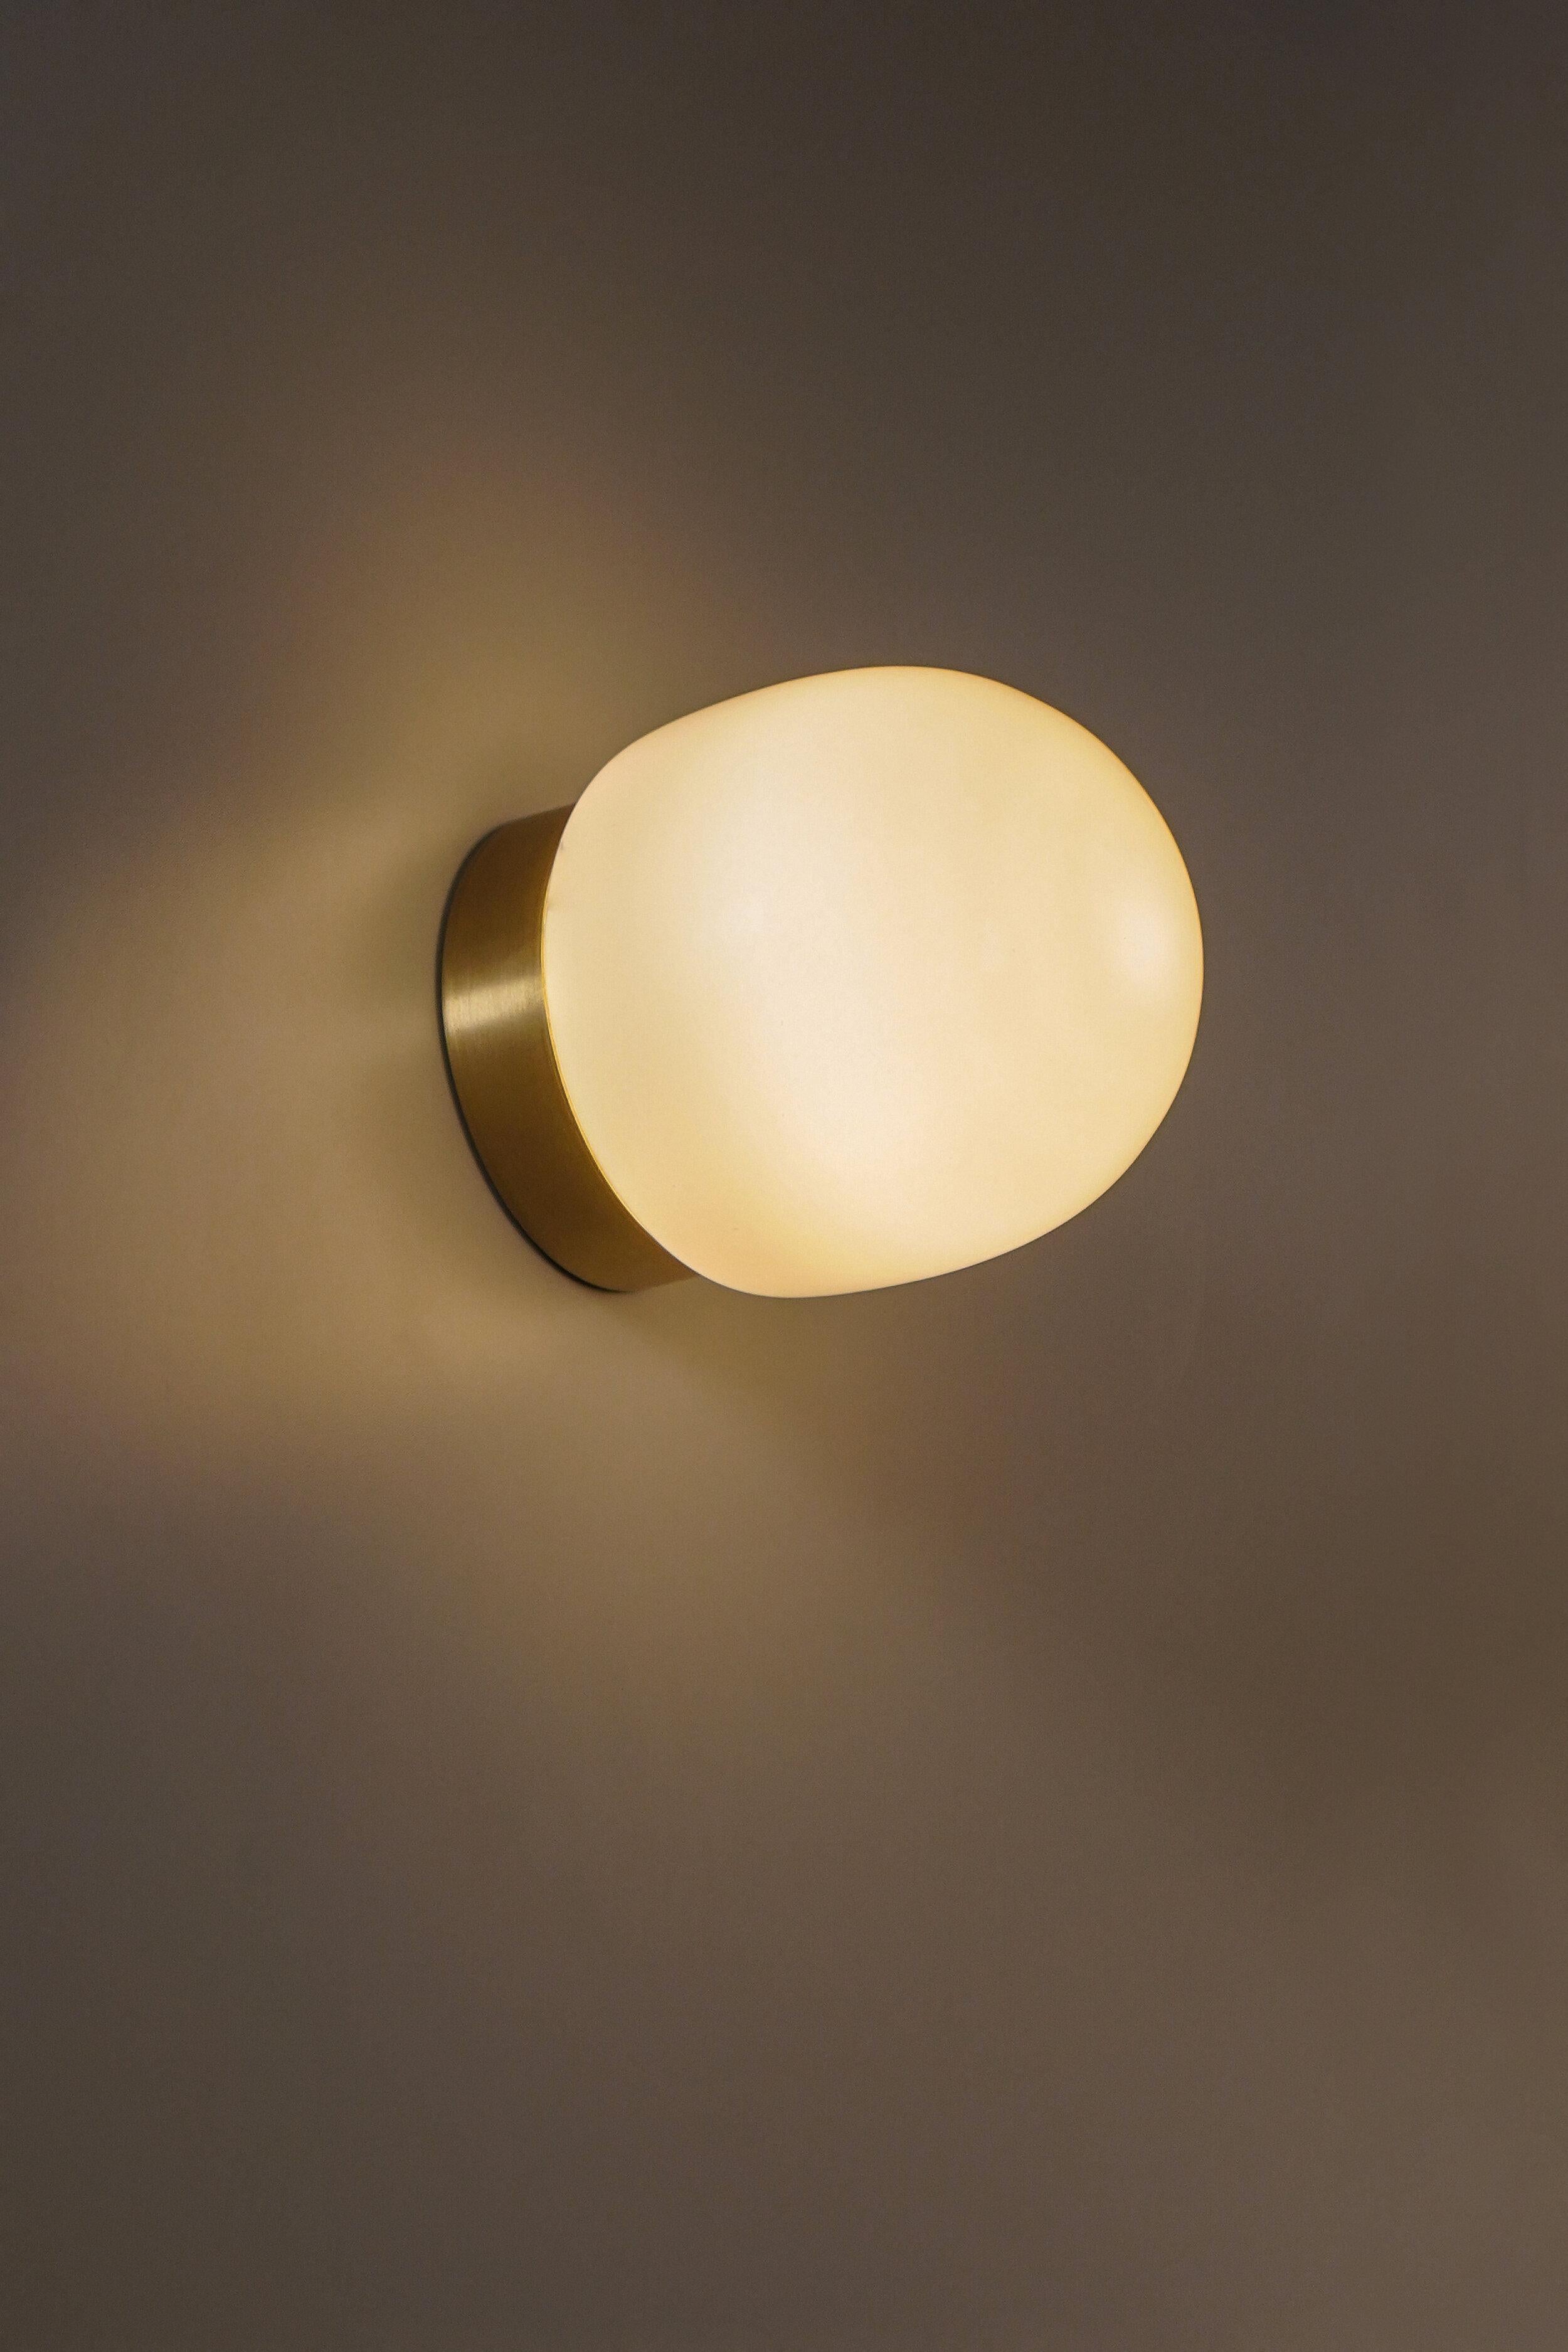 Nuvol simple wall light by Contain.
Dimensions: D 10 x H 11 cm 
Materials: brass structure and opal glass.
Available in different finishes. 

All our lamps can be wired according to each country. If sold to the USA it will be wired for the USA for